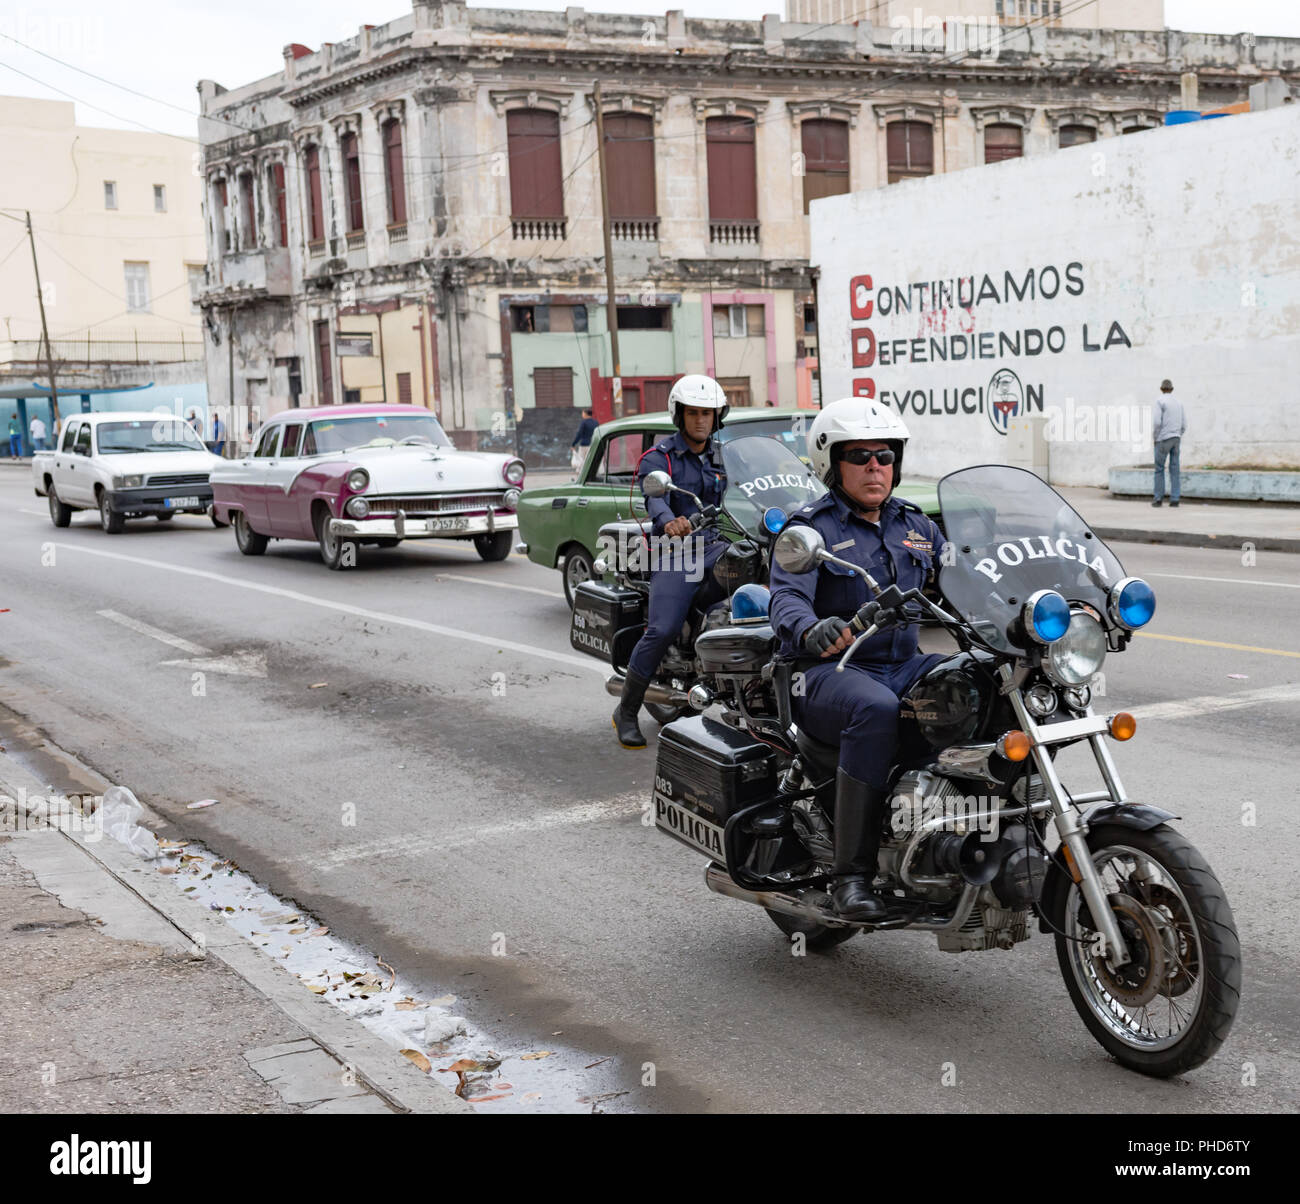 Two motorcycles carrying Cuban police in the foreground while in the background a mural about revolution. Stock Photo